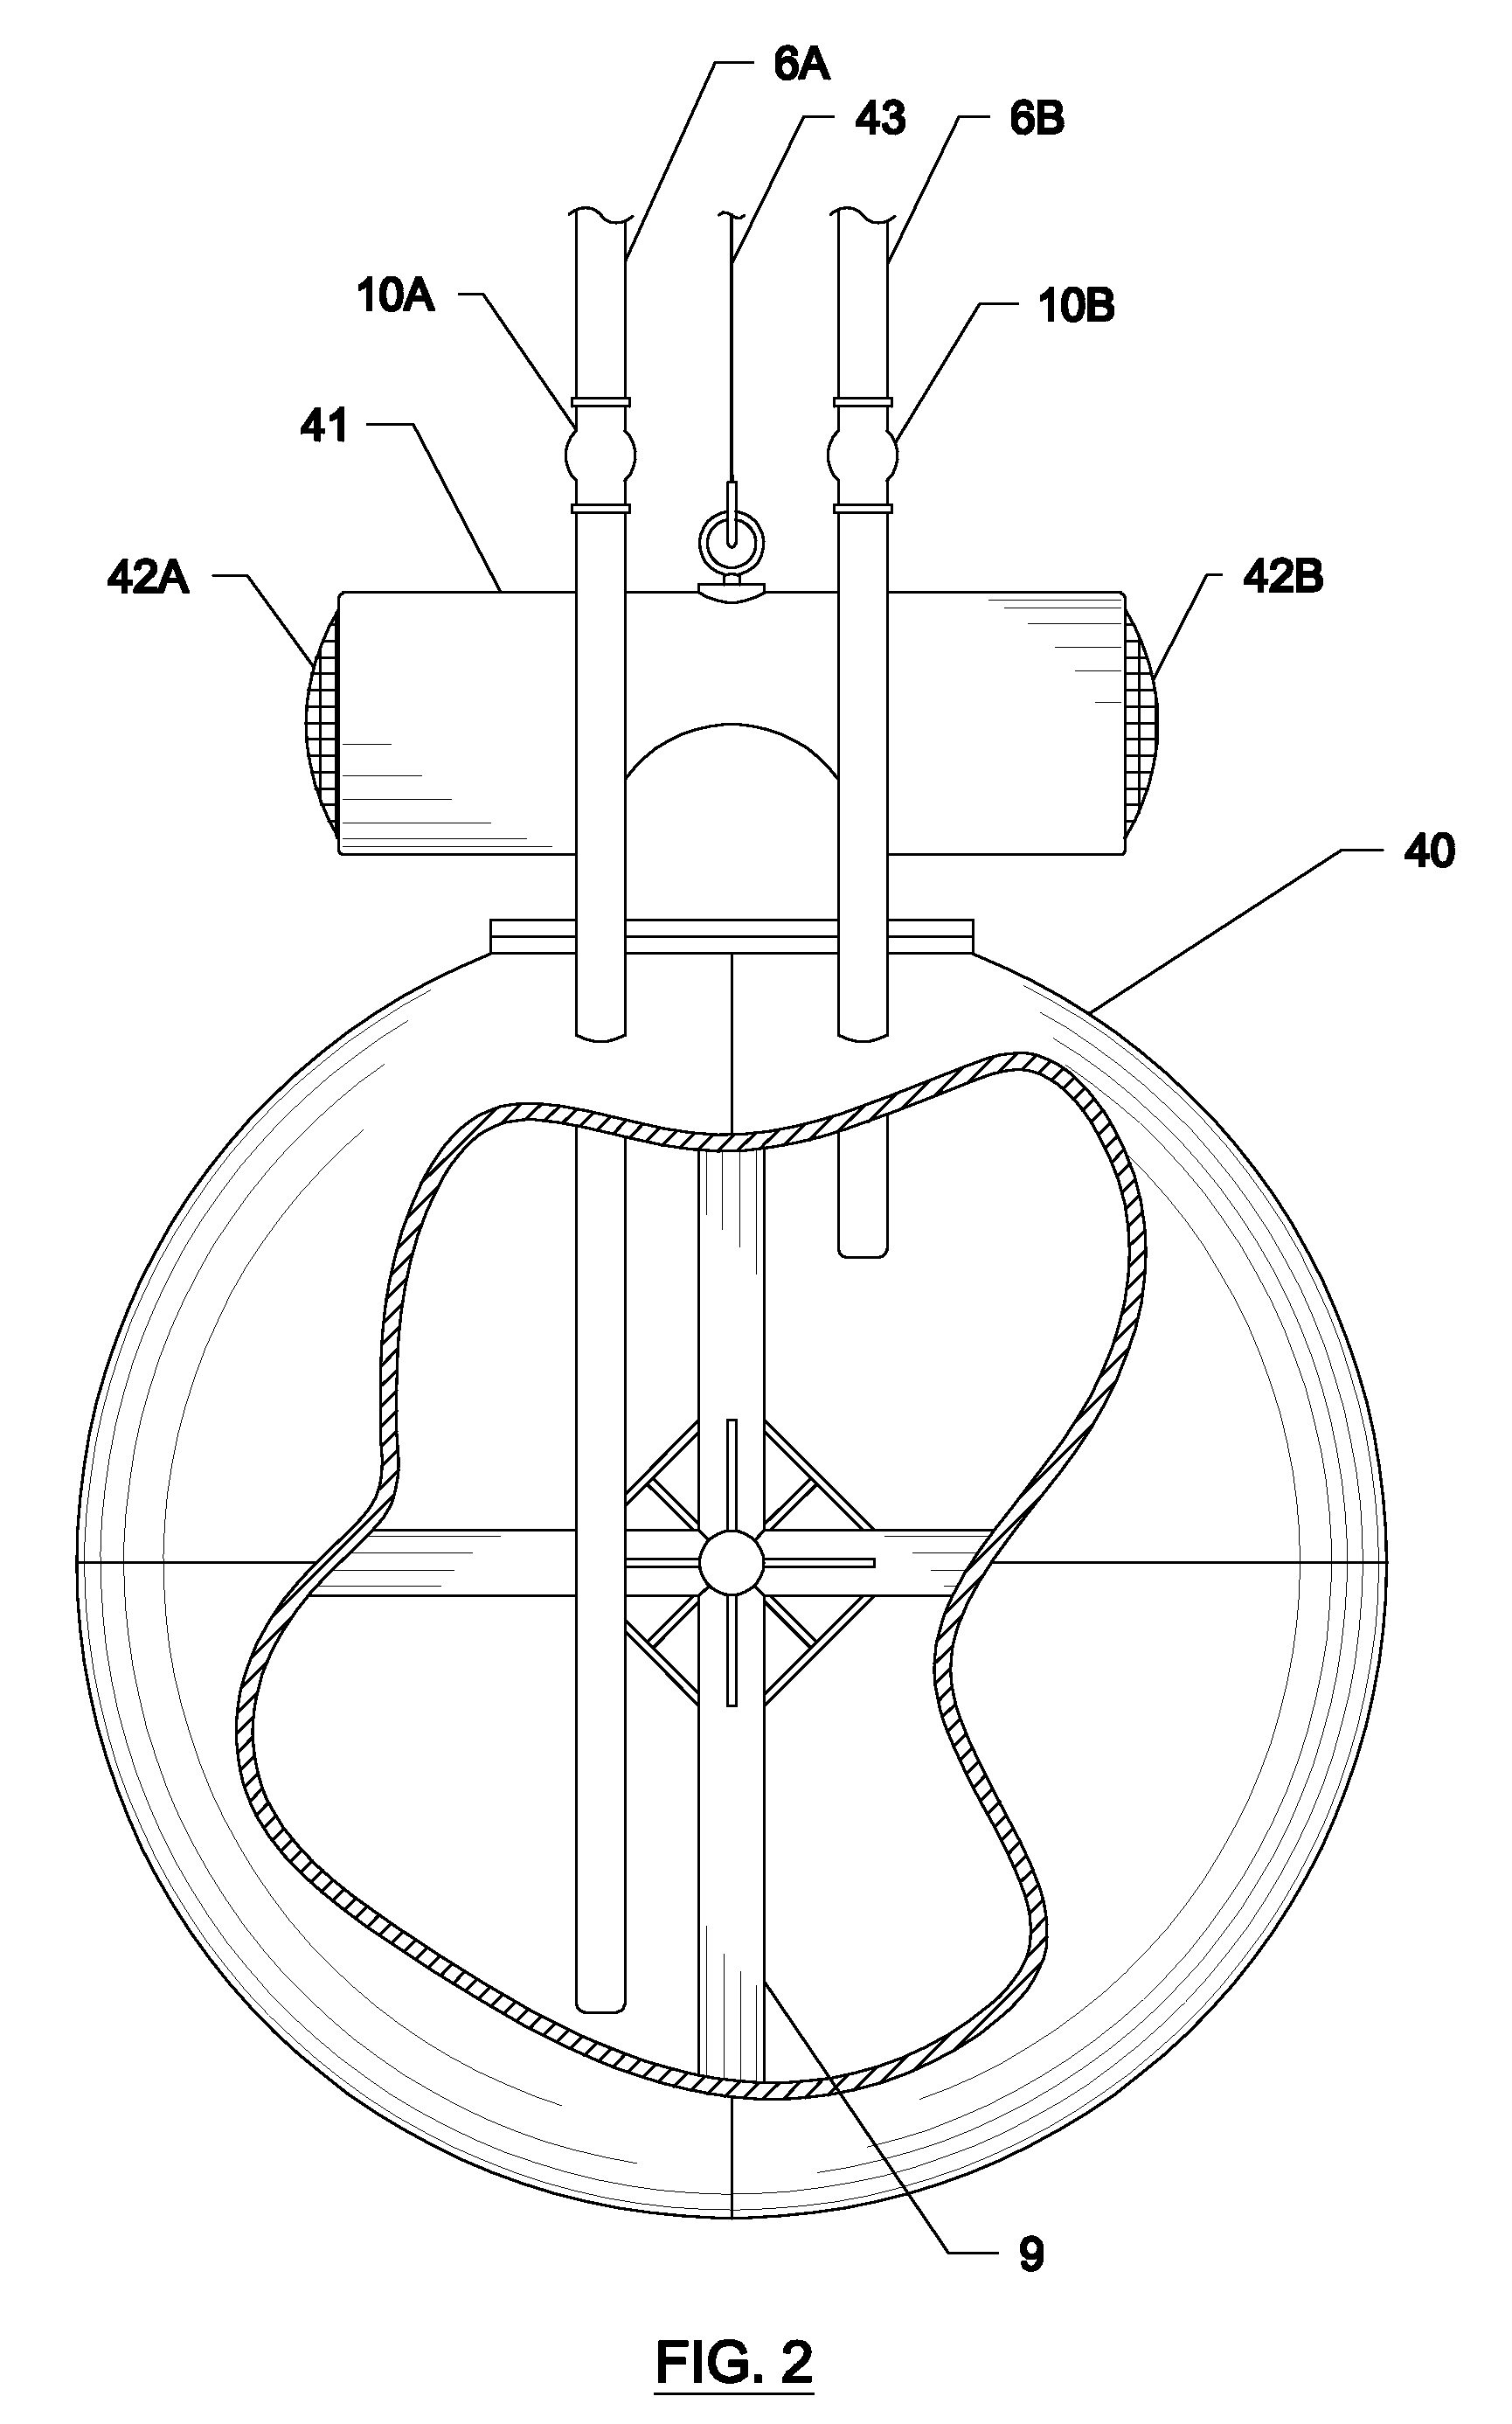 Method, apparatus, and processes for producing potable water utilizing reverse osmosis at ocean depth in combination with shipboard moisture dehumidification